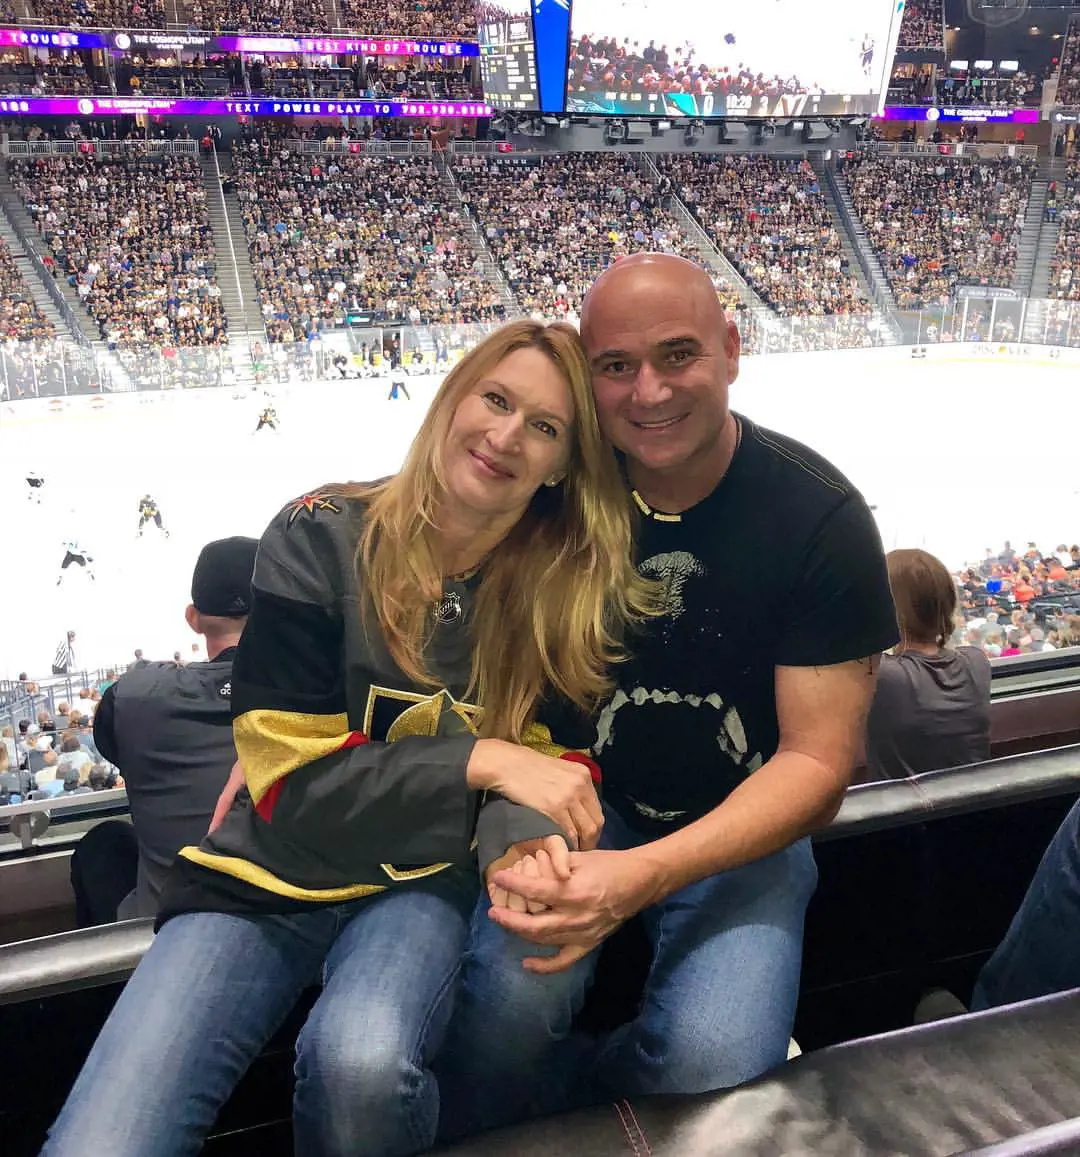 Agassi and Graf attended an NHL game at T-Mobile Arena in April 2018